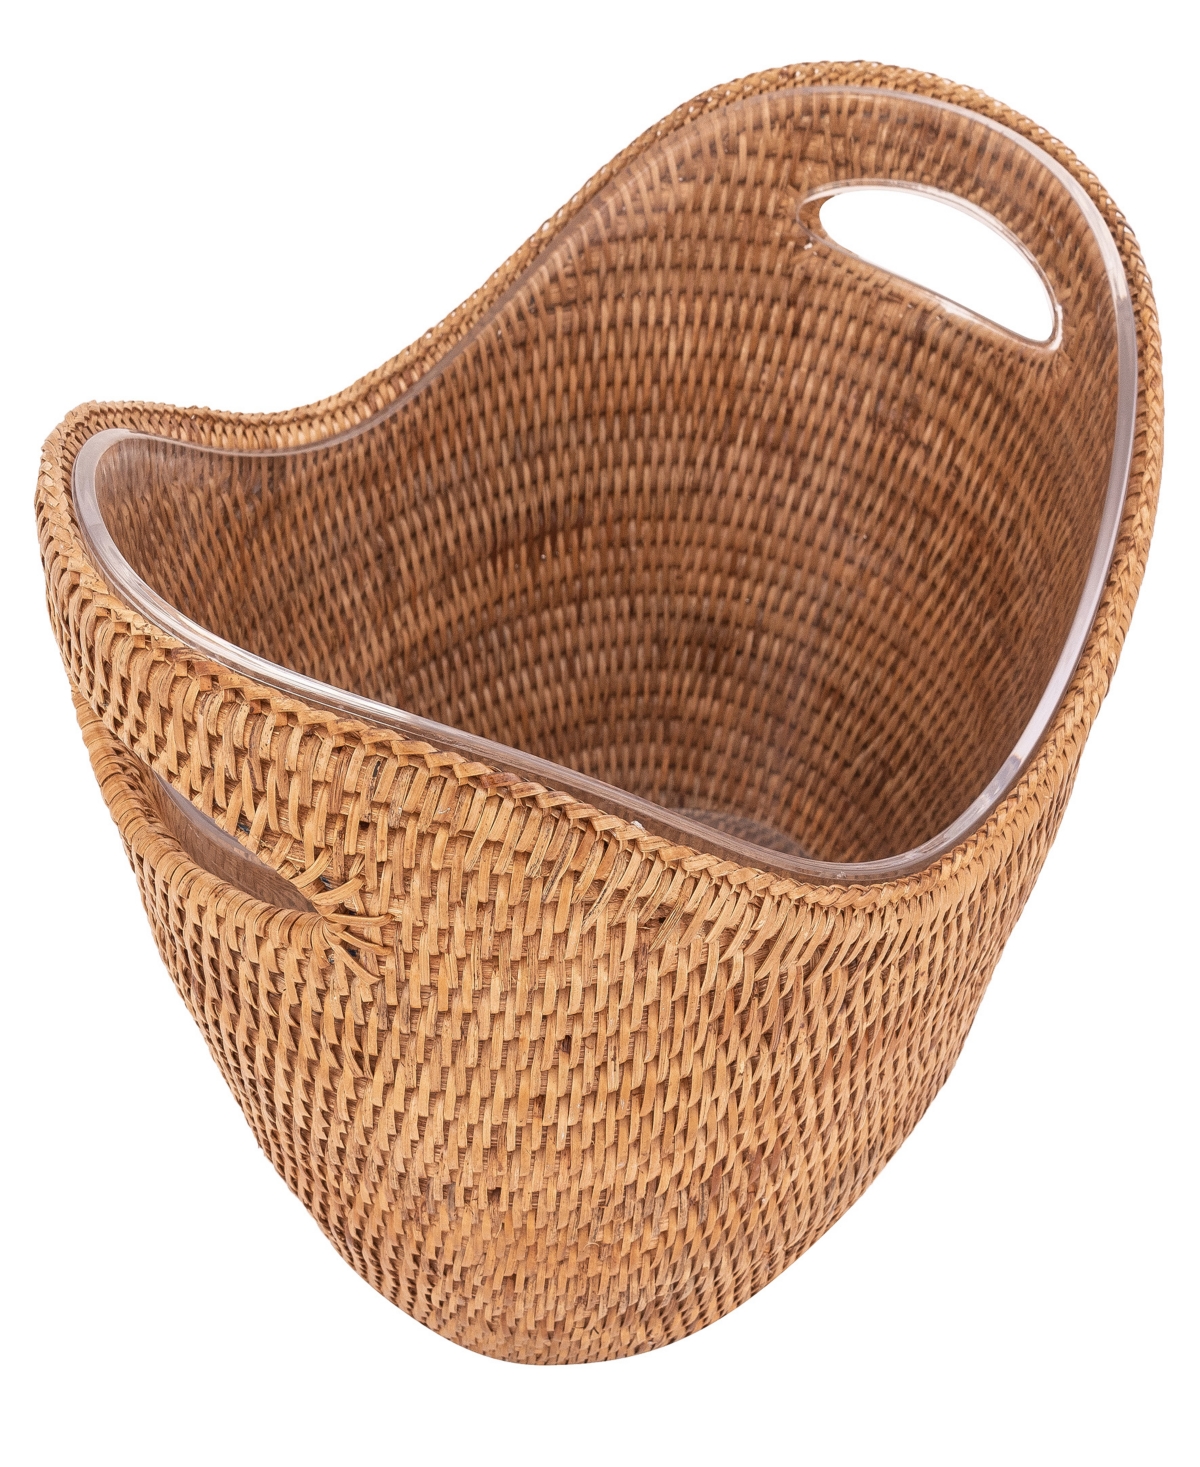 Artifacts Trading Company Rattan Champagne Bucket With Acrylic Insert In Honey Brown